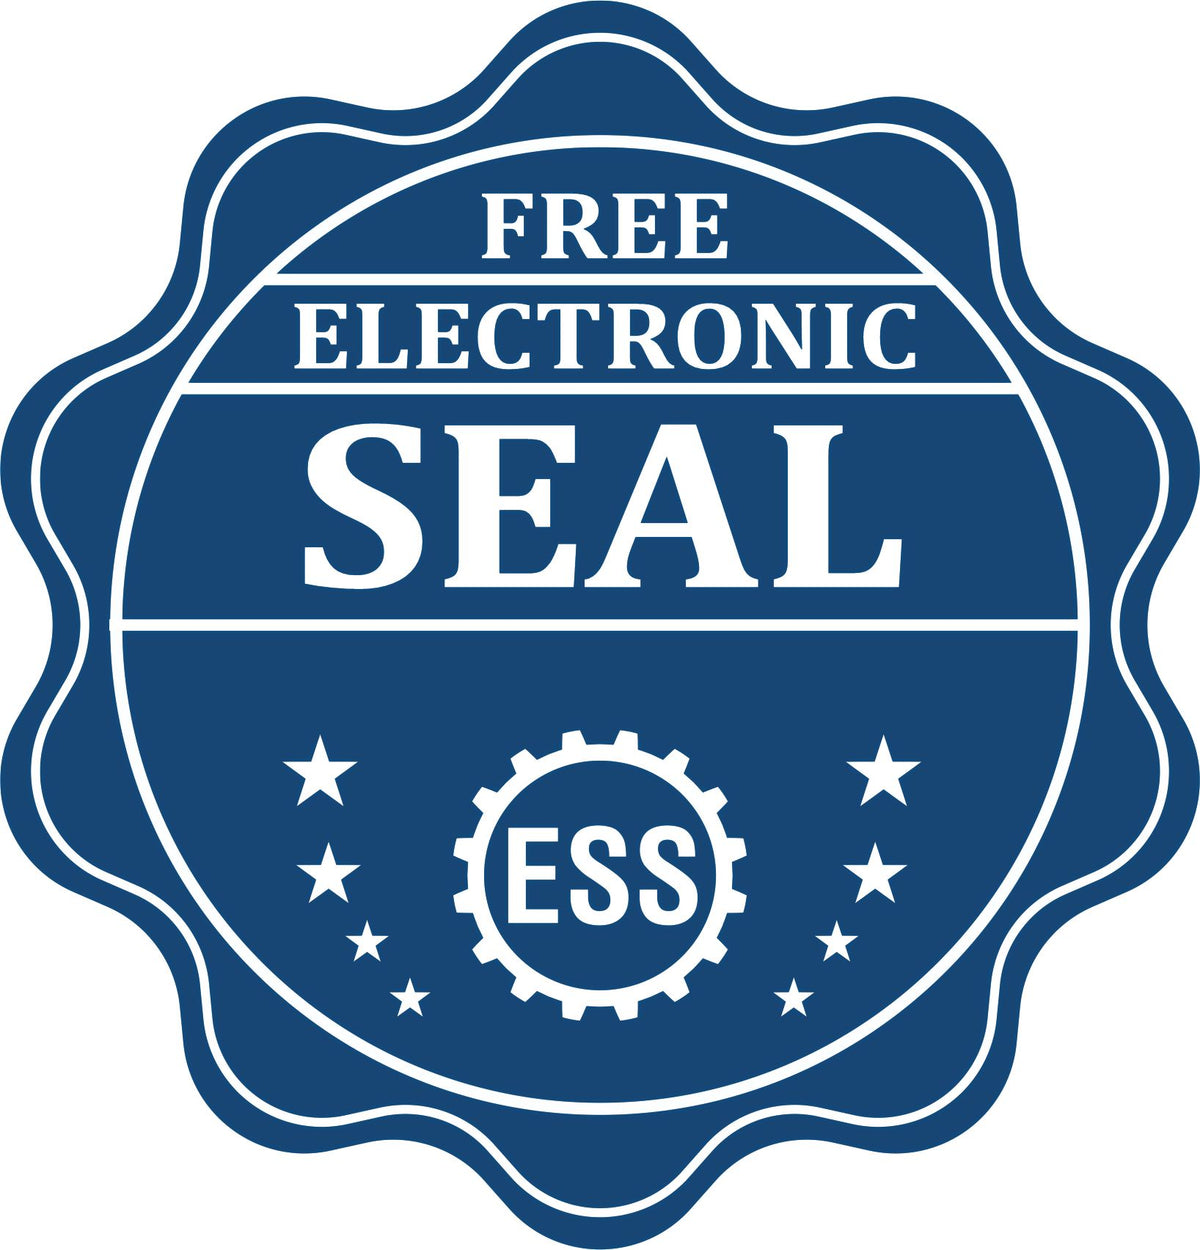 A badge showing a free electronic seal for the State of New York Soft Land Surveyor Embossing Seal with stars and the ESS gear on the emblem.